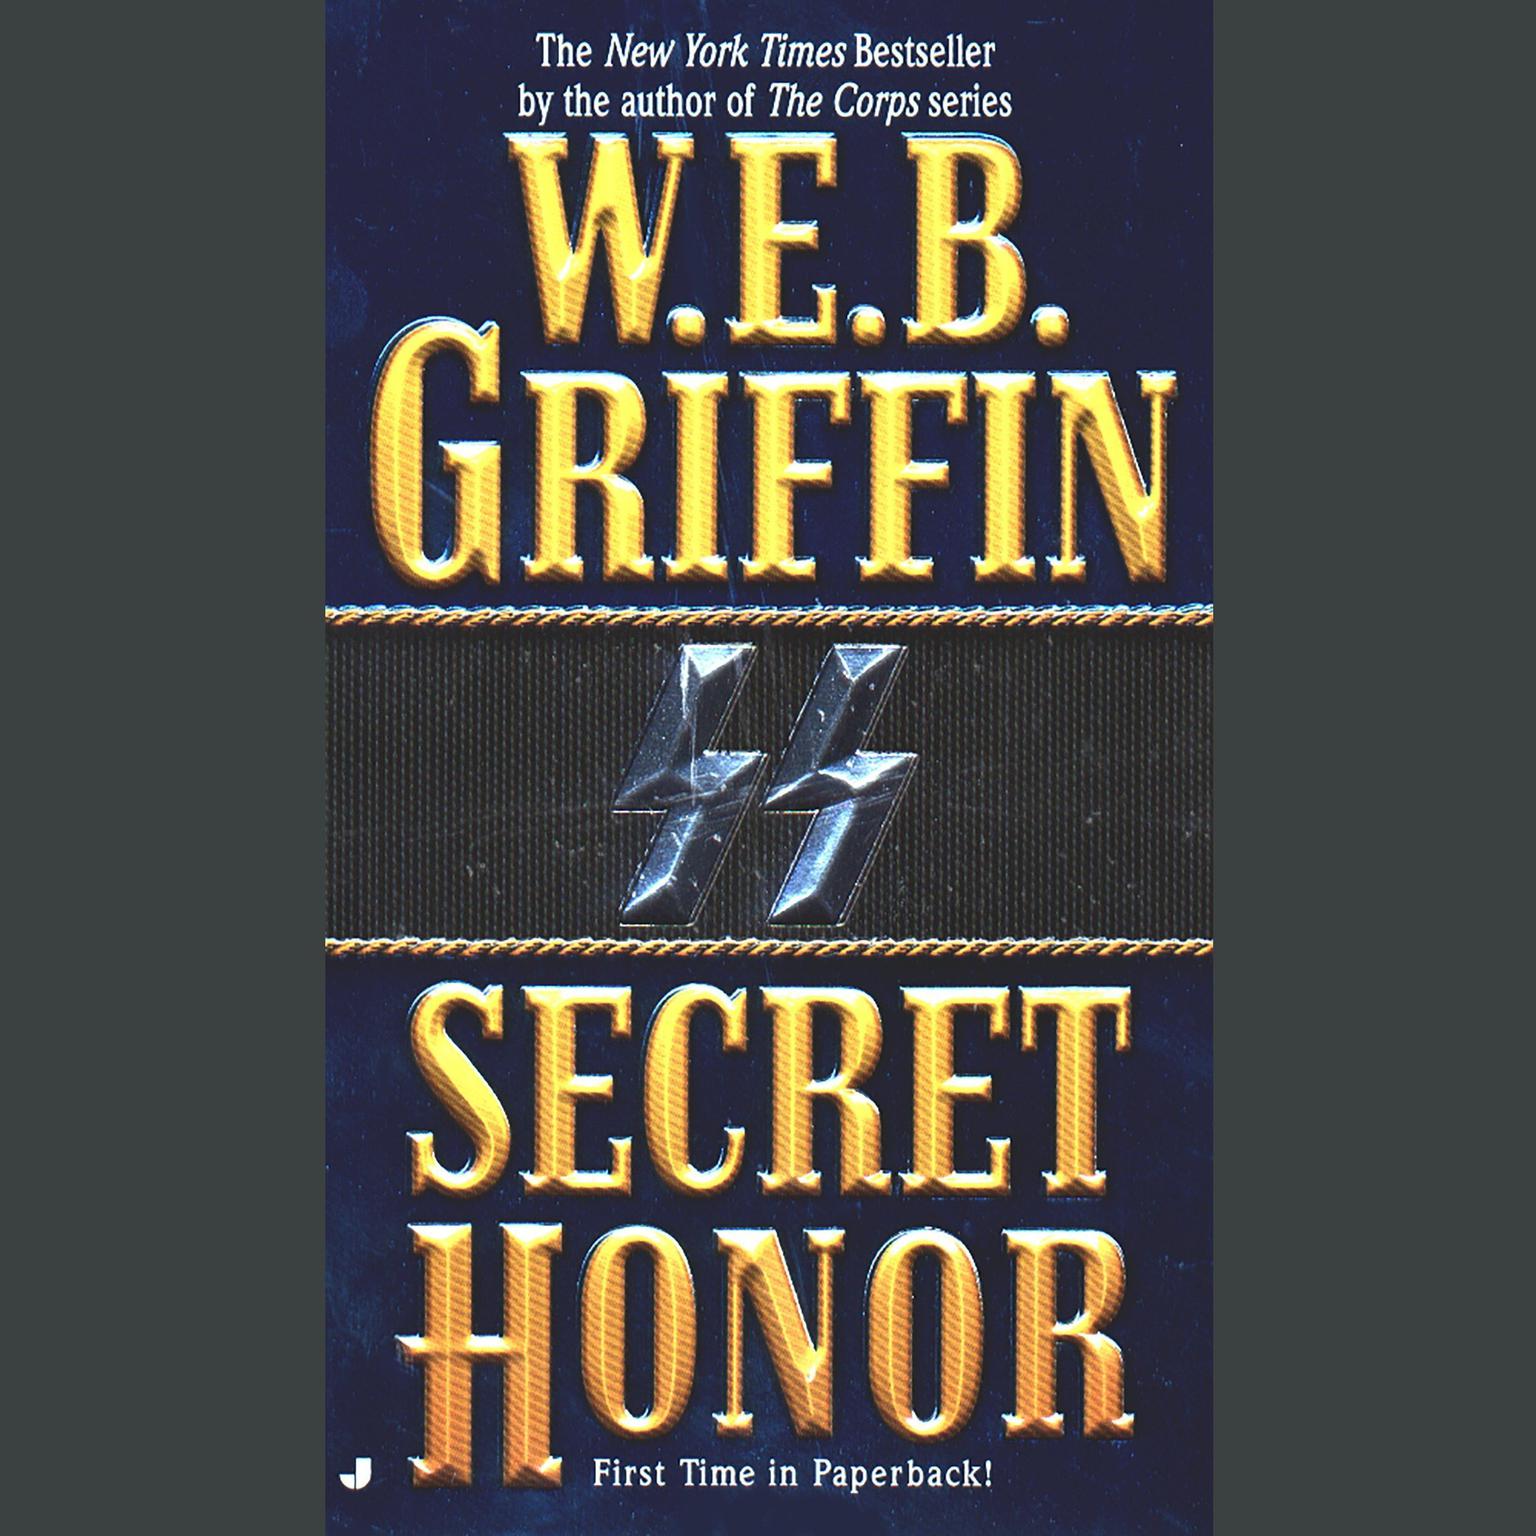 Secret Honor Audiobook, by W. E. B. Griffin